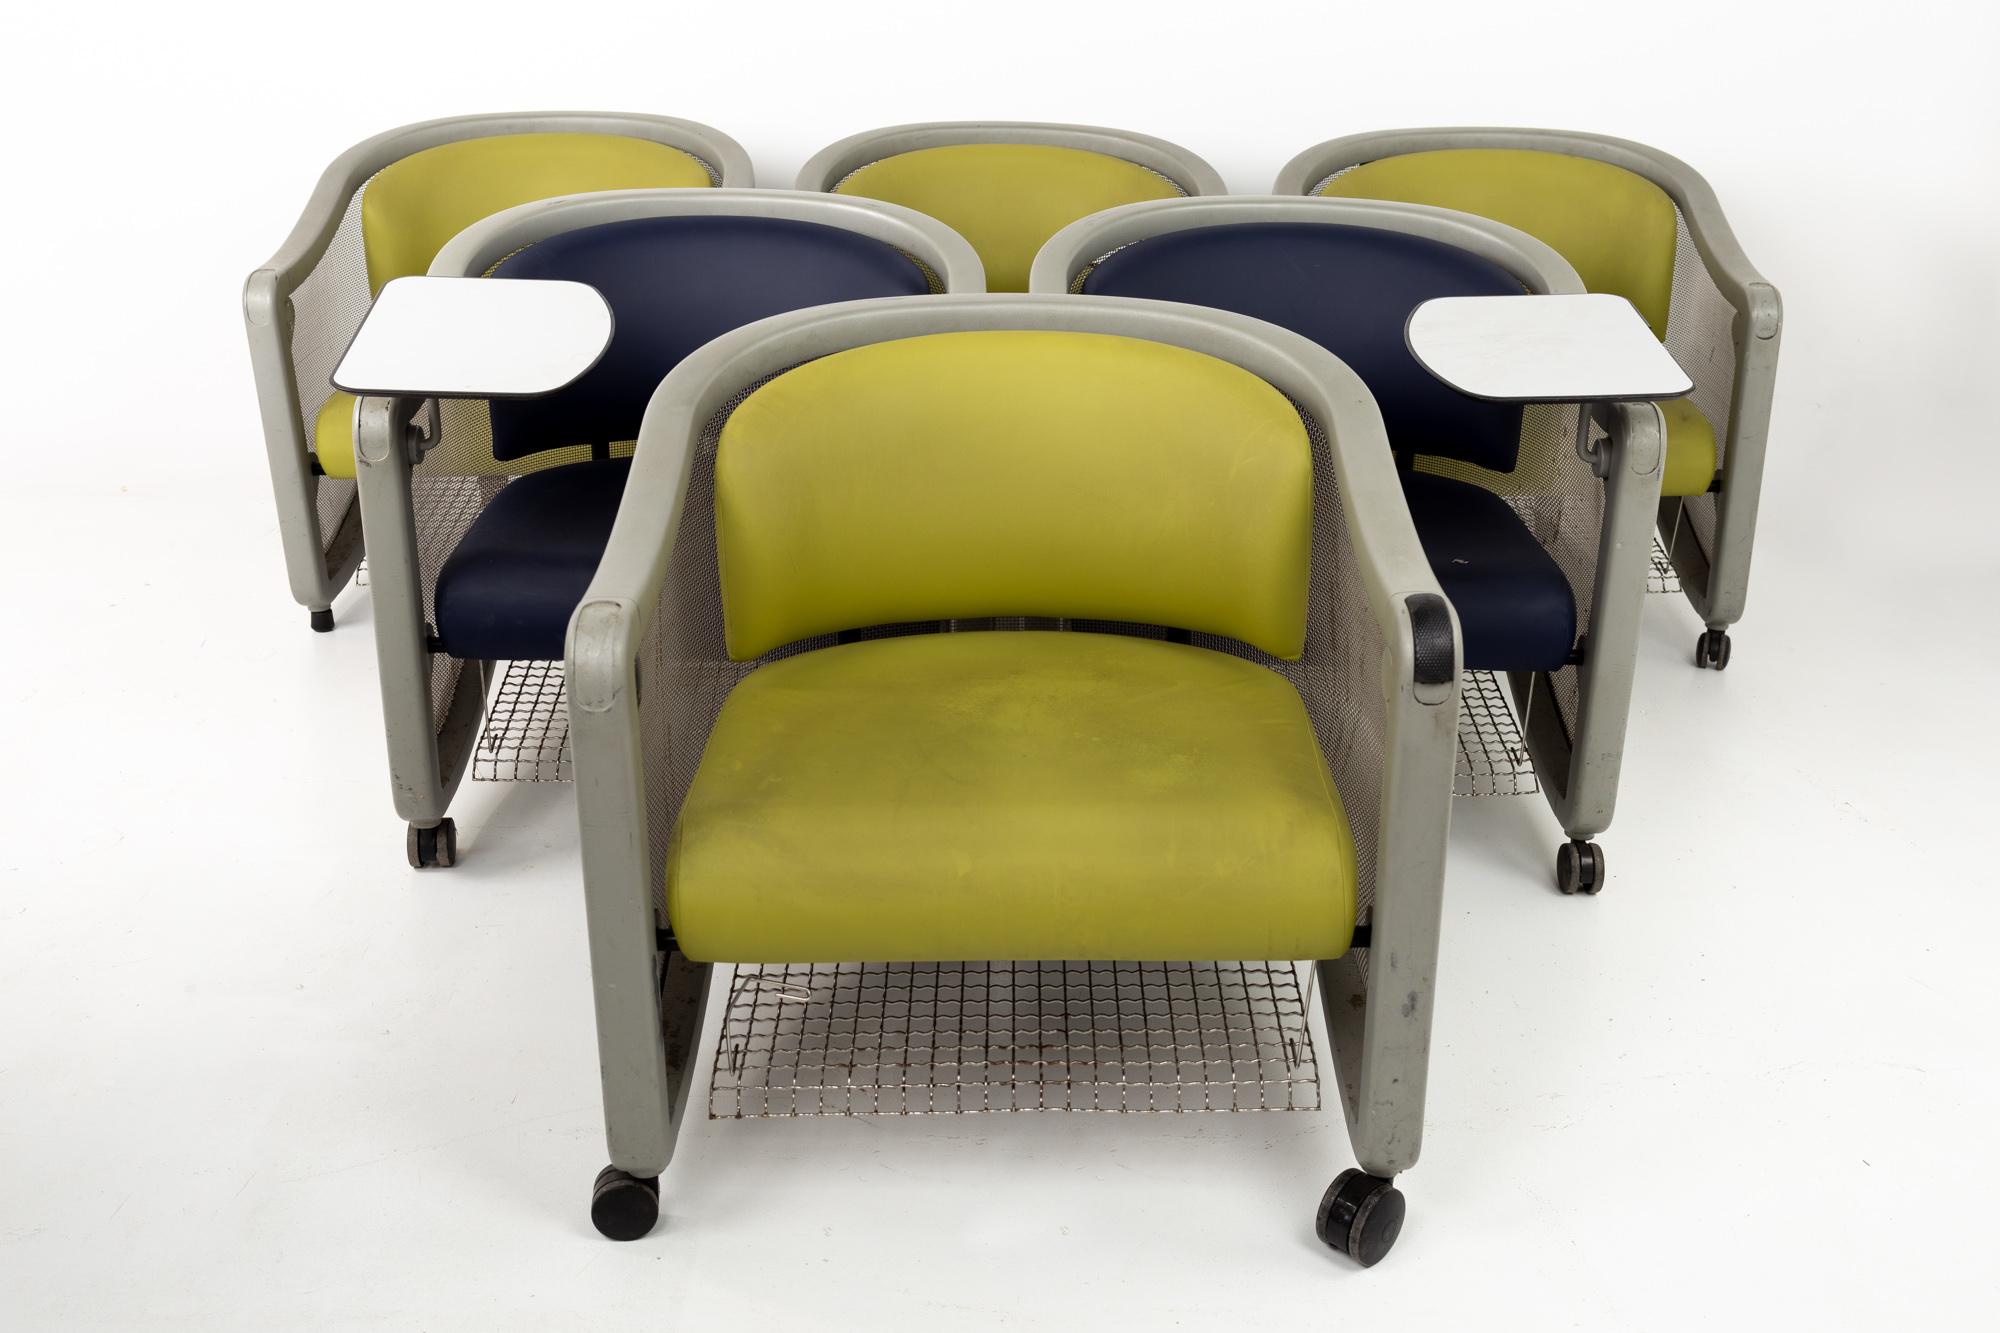 Neil Frankel for Knoll Mid Century wheeled office lounge chairs - Set of 6
These chairs are 28 wide x 25.75 deep x 29.5 inches high, with a seat height of 16 and arm height of 27 inches

All pieces of furniture can be had in what we call restored